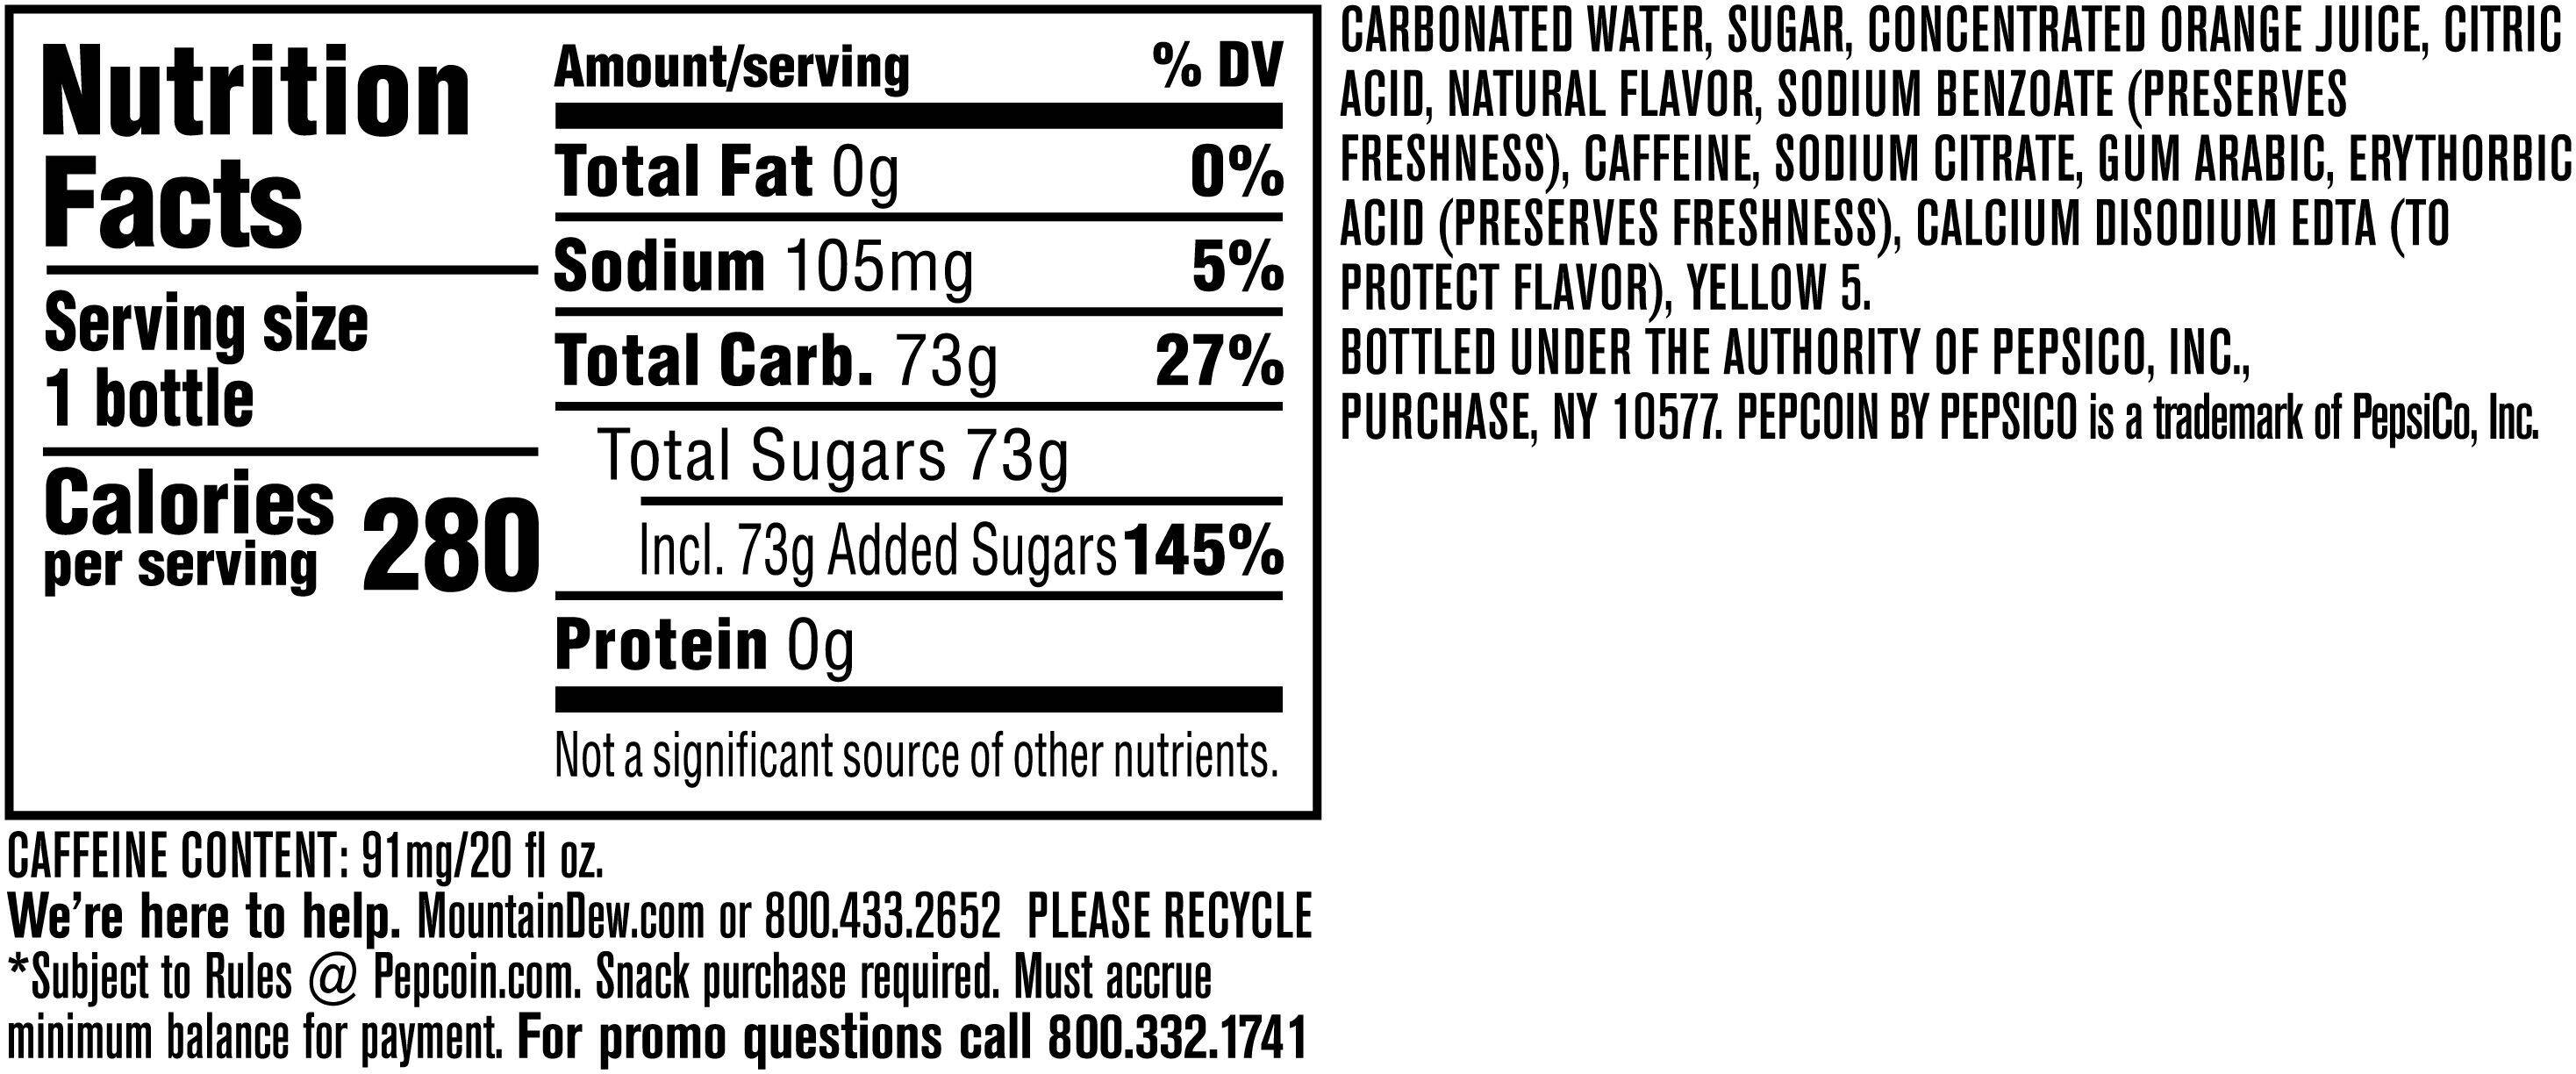 Image describing nutrition information for product Mtn Dew Made With Real Sugar